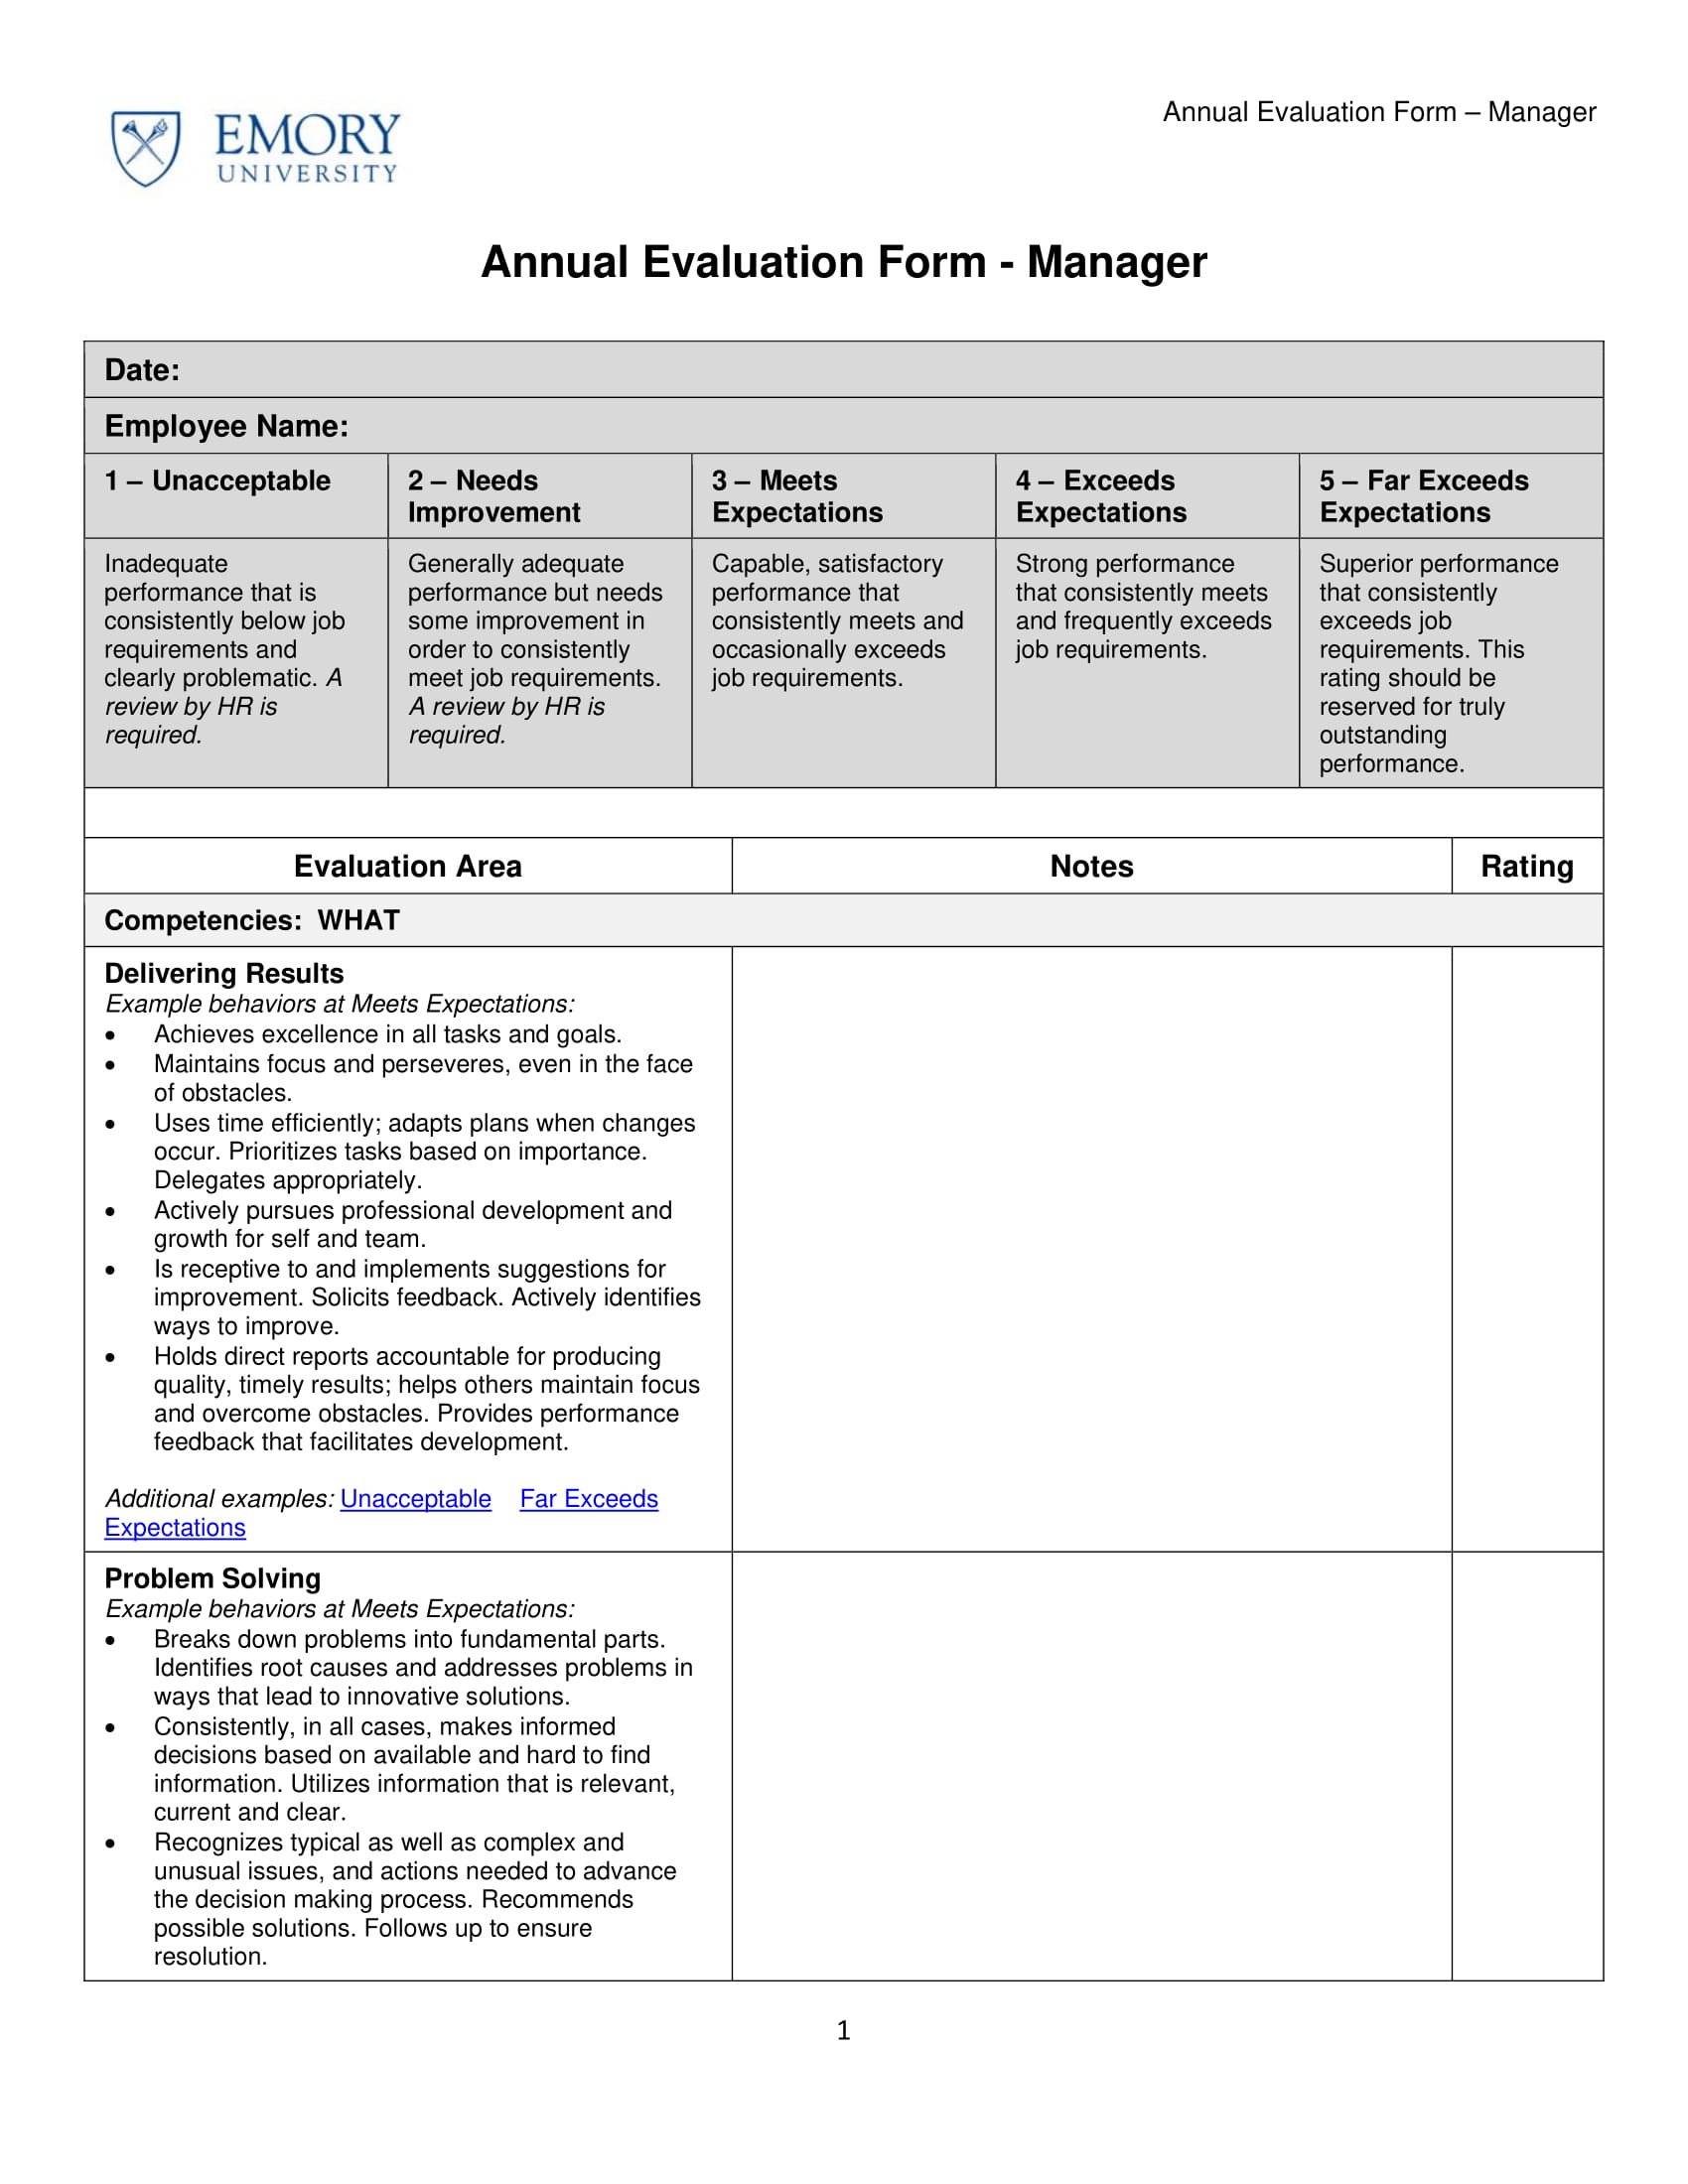 FREE 5+ General Manager Evaluation Forms in PDF